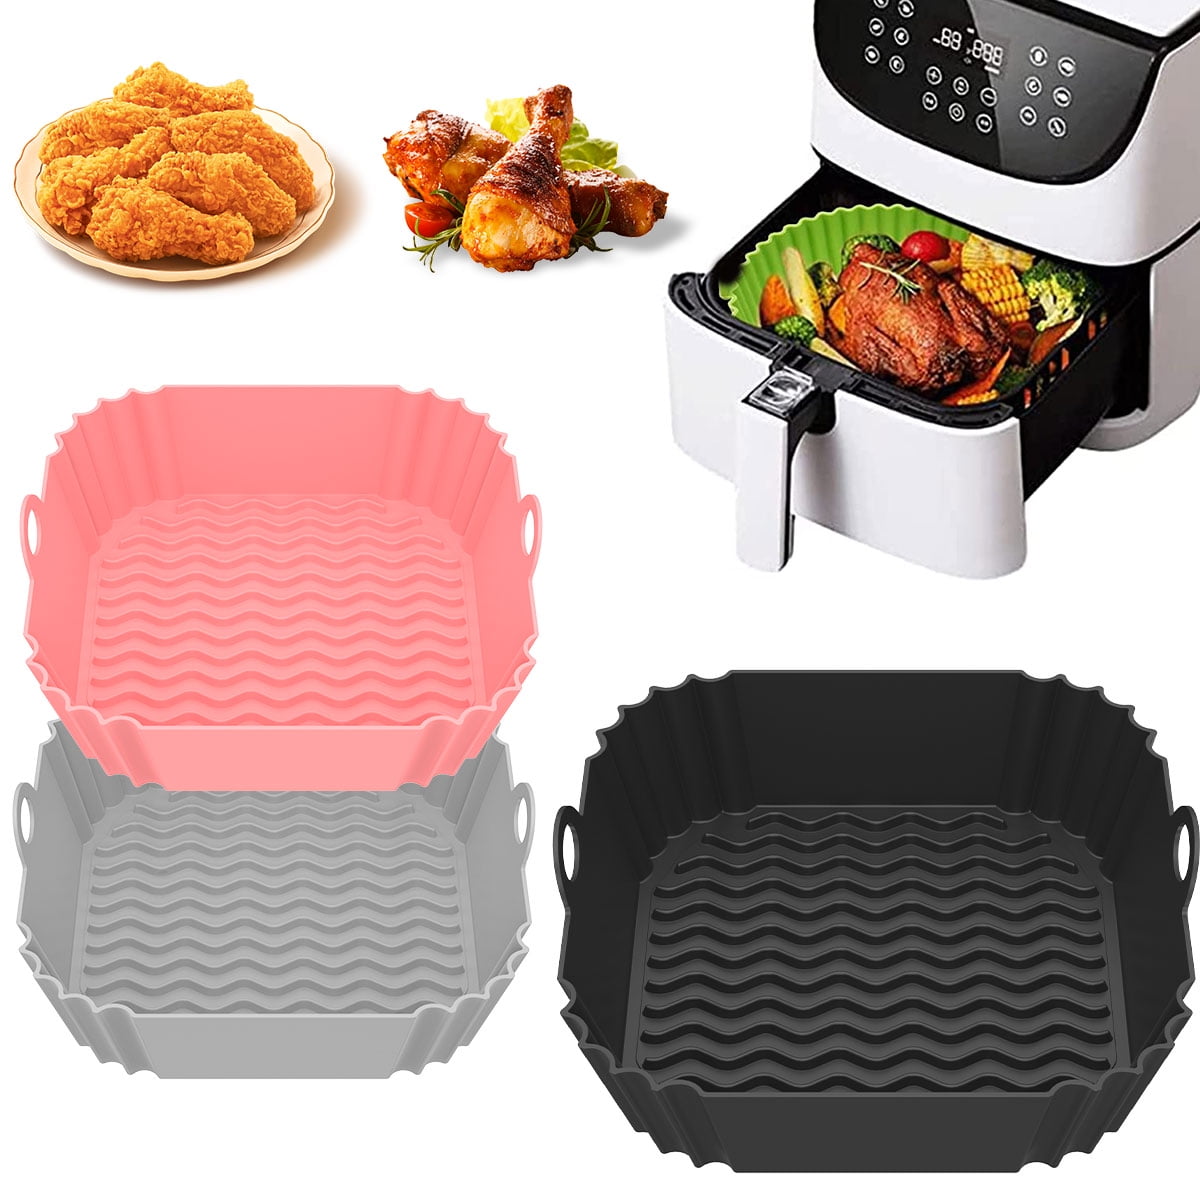 Dropship 2 PCS Air Fryer Silicone Liners Reusable Air Fryer Silicone Pot  Baking Tray Mat to Sell Online at a Lower Price